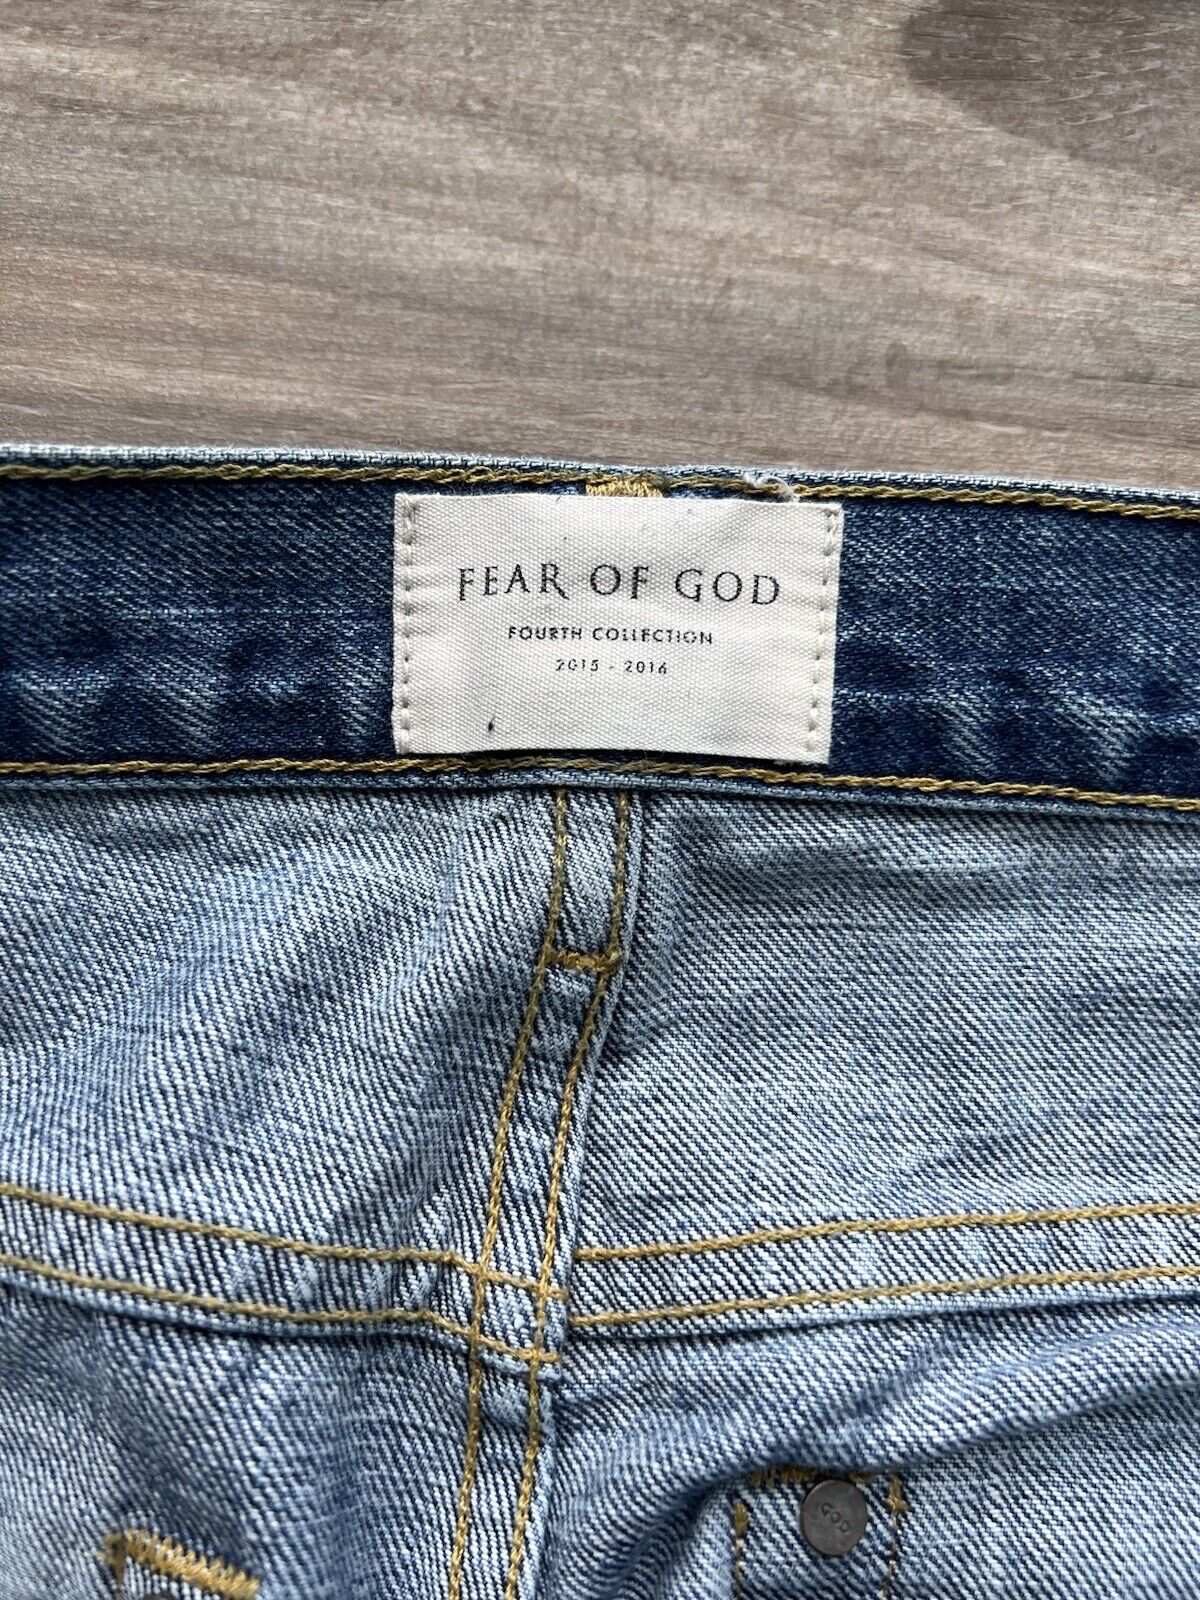 Fear of God Fourth 4th Collection Selvedge Indigo Denim Jeans Size 